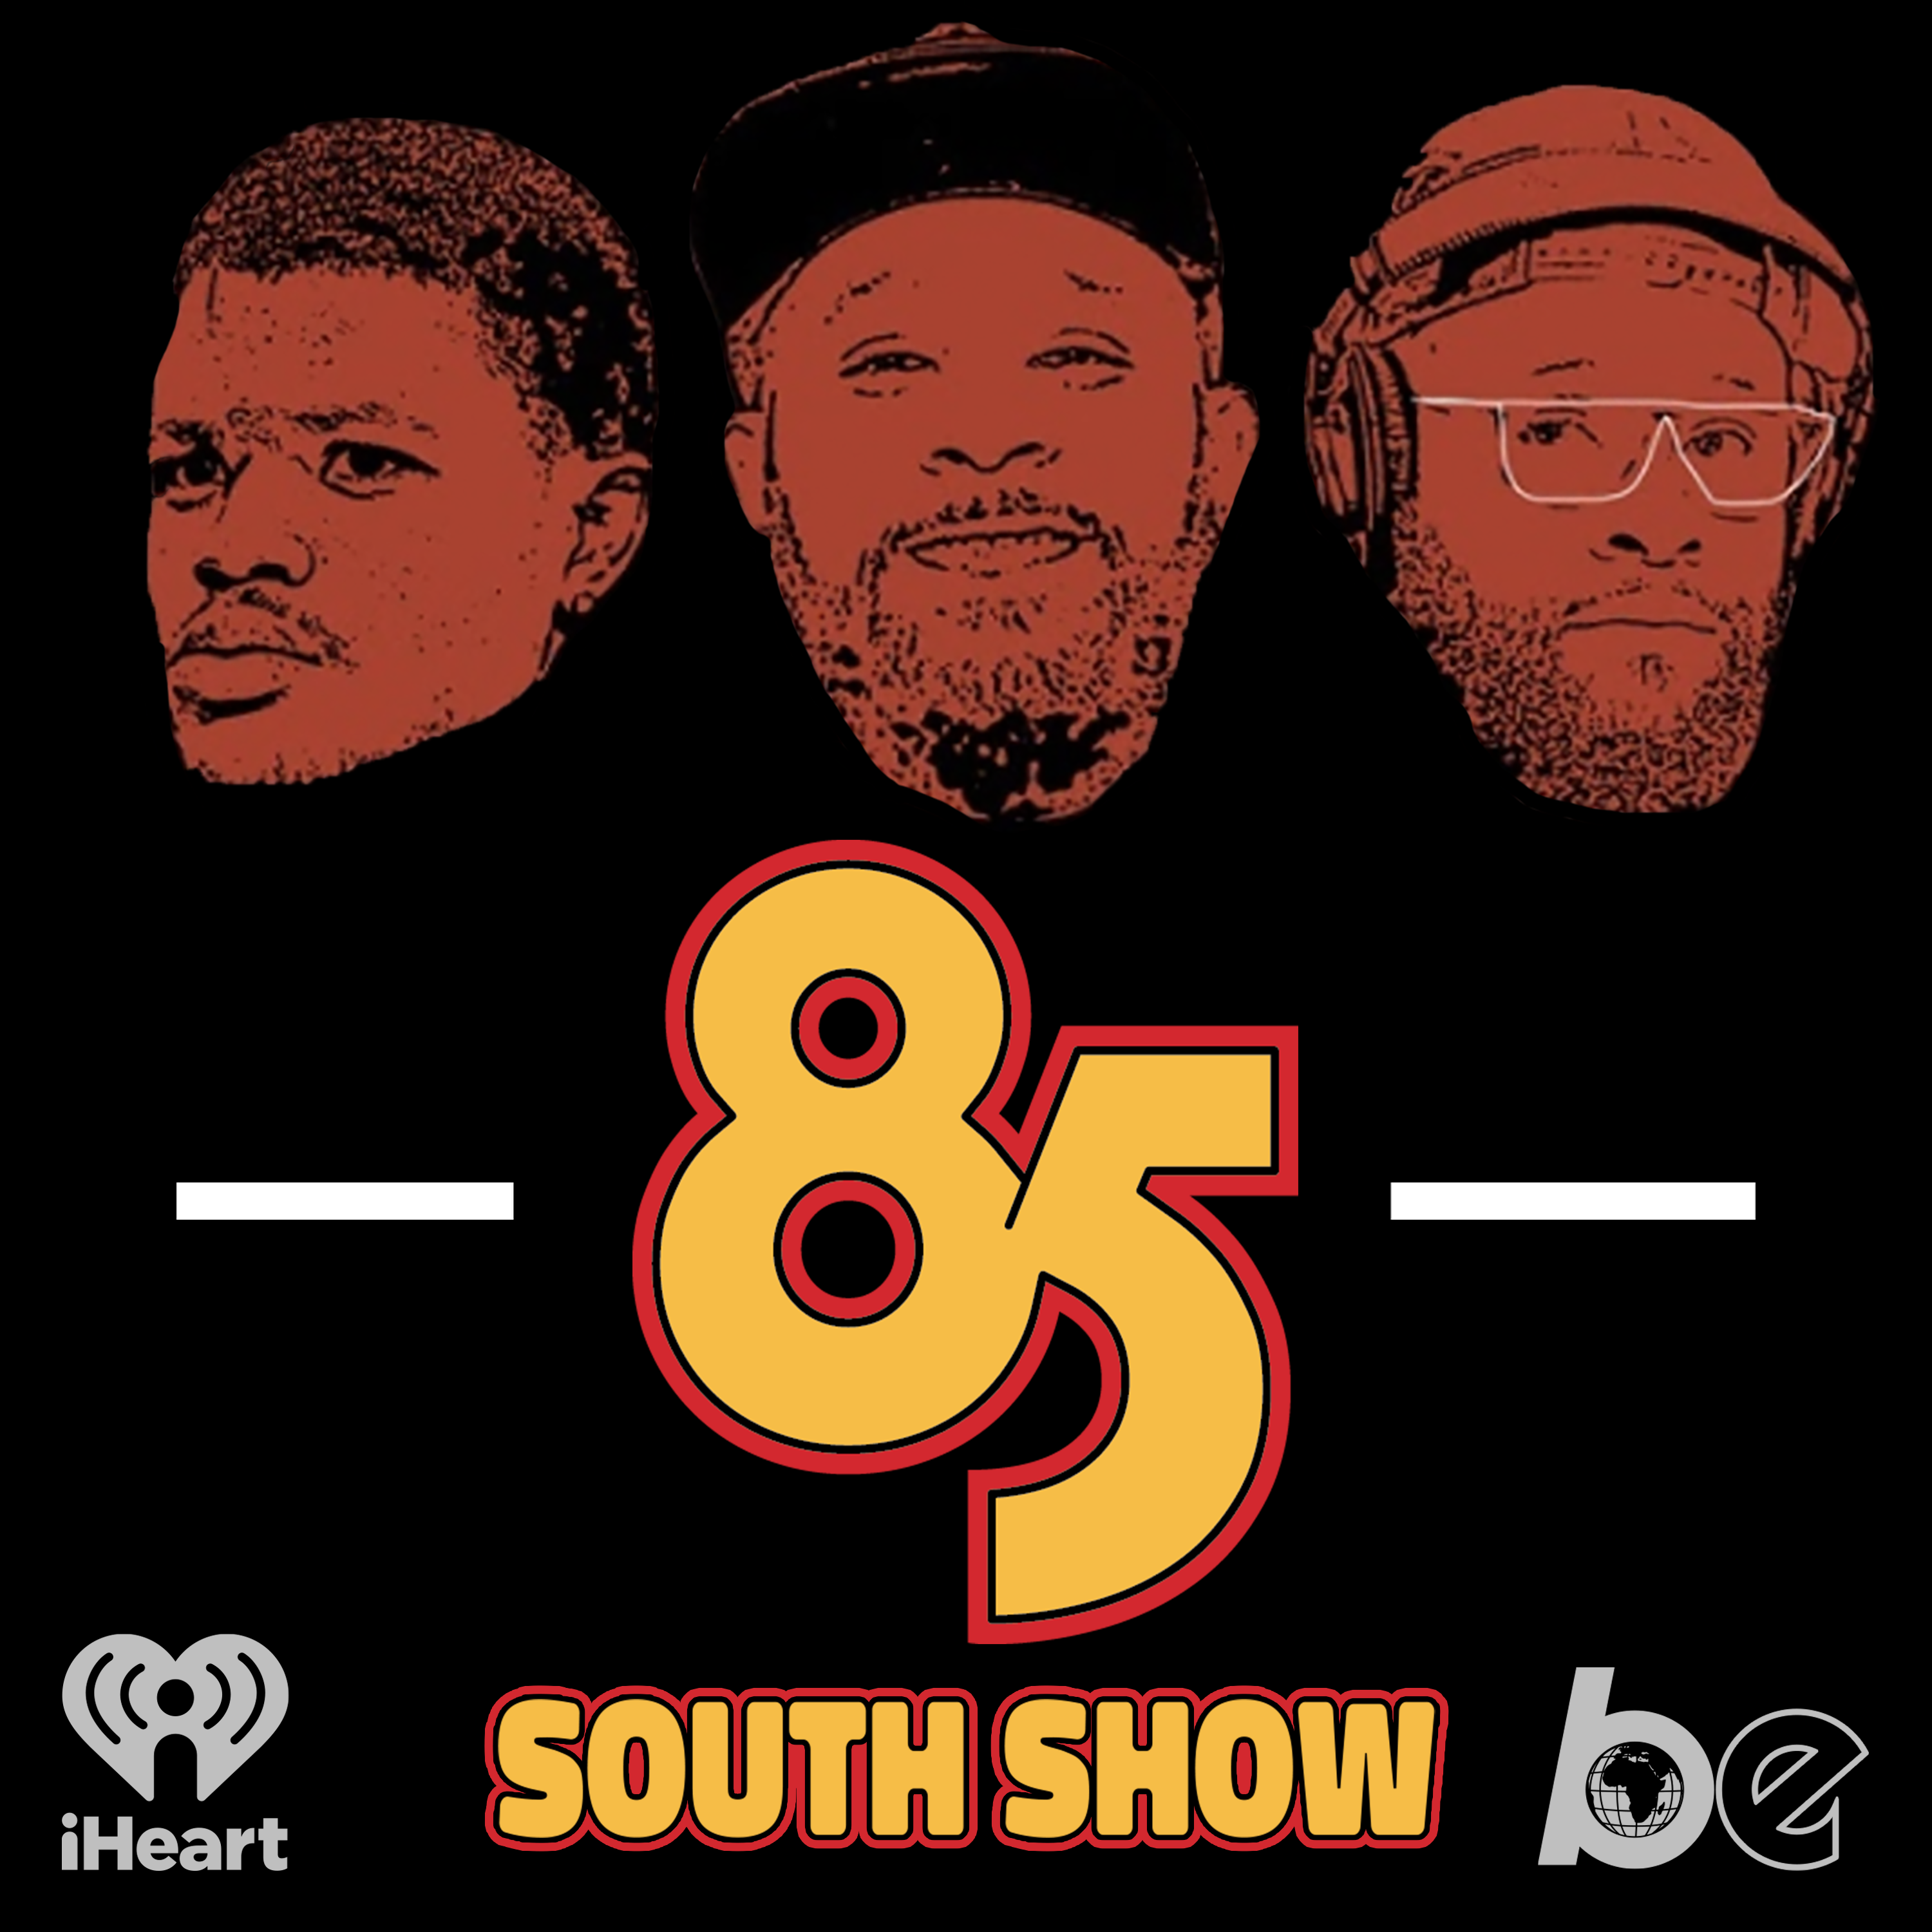 ERICA BANKS in the Trap | 85 South Show Podcast